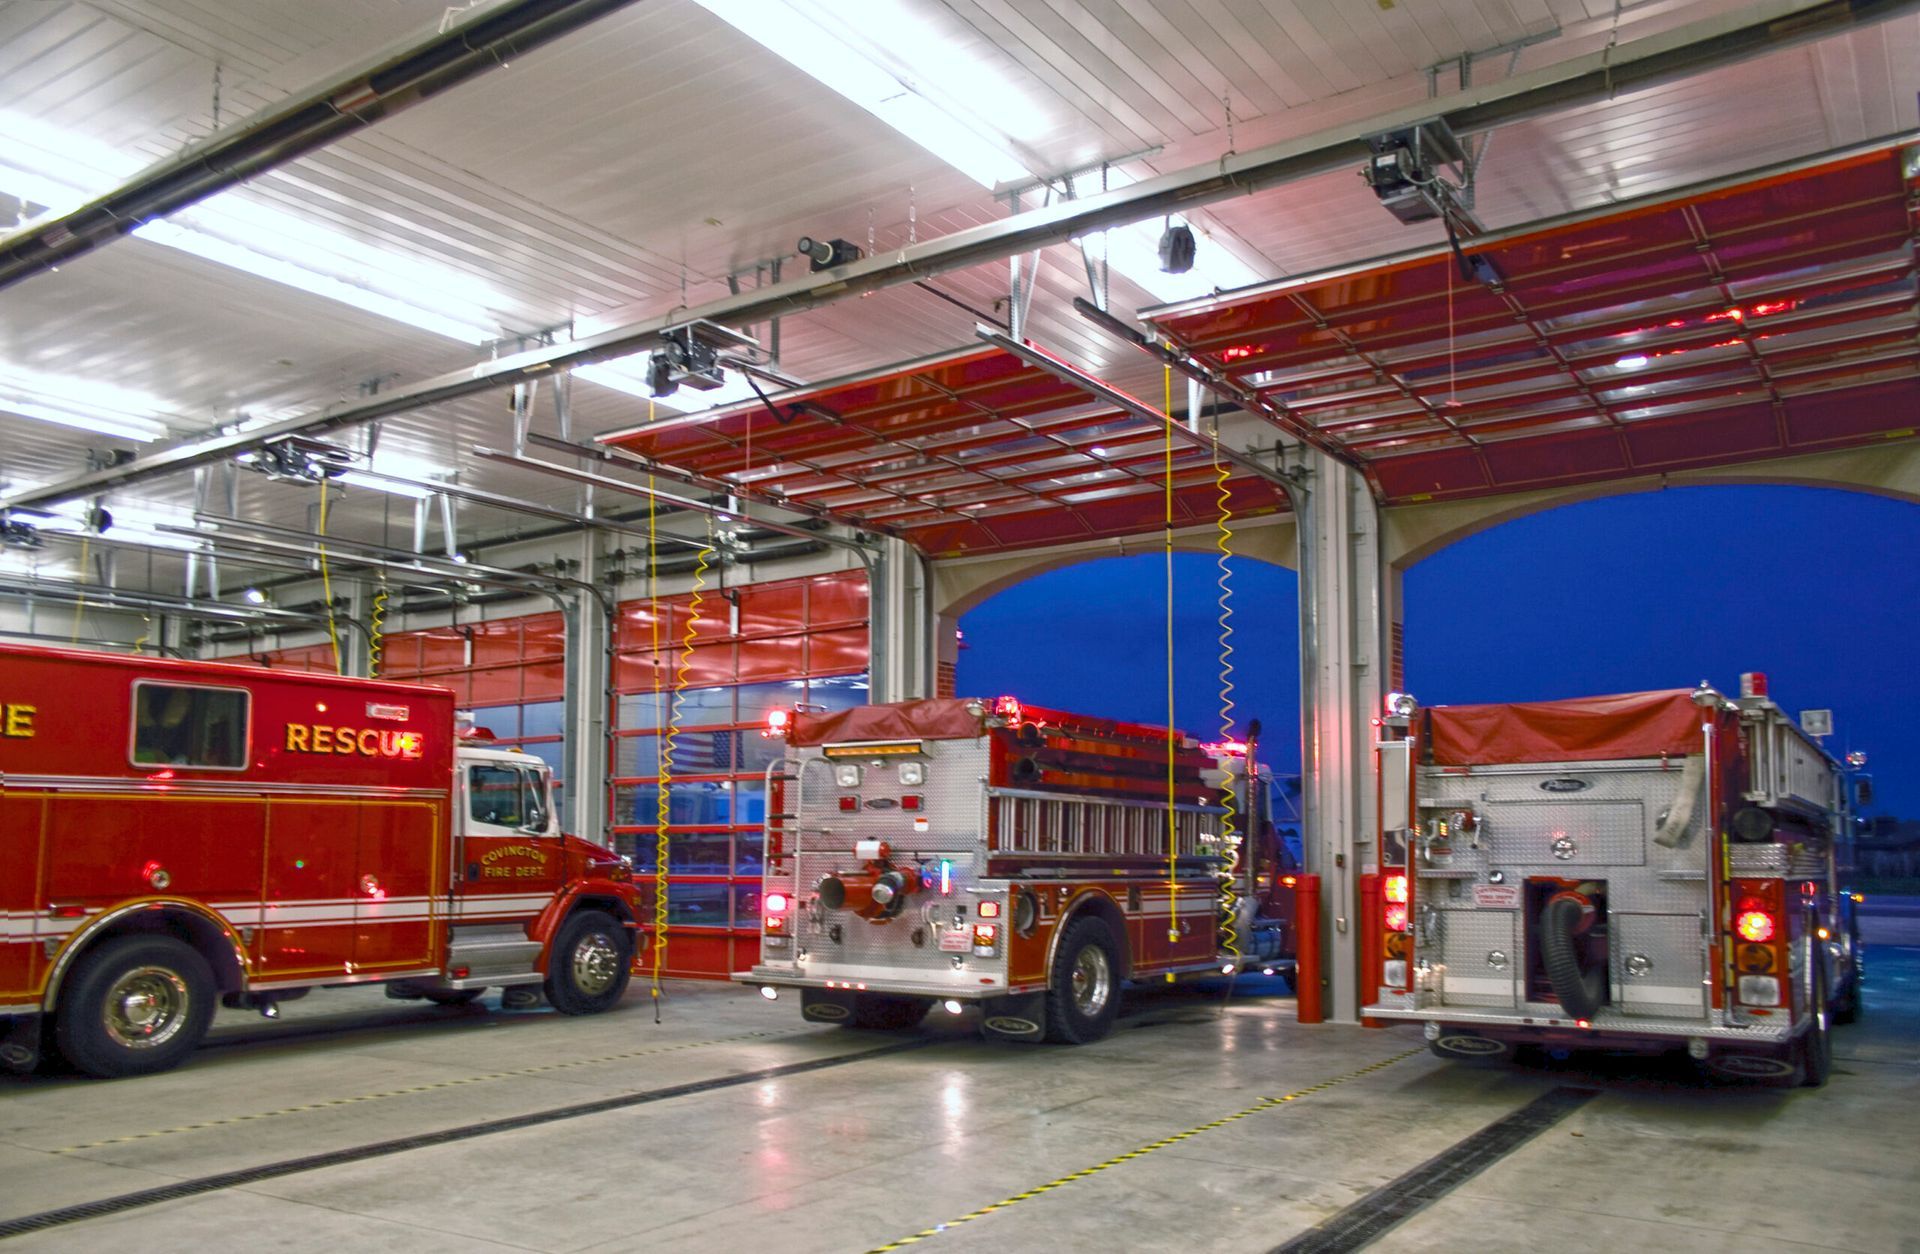 three fire trucks are parked in a fire station at night .